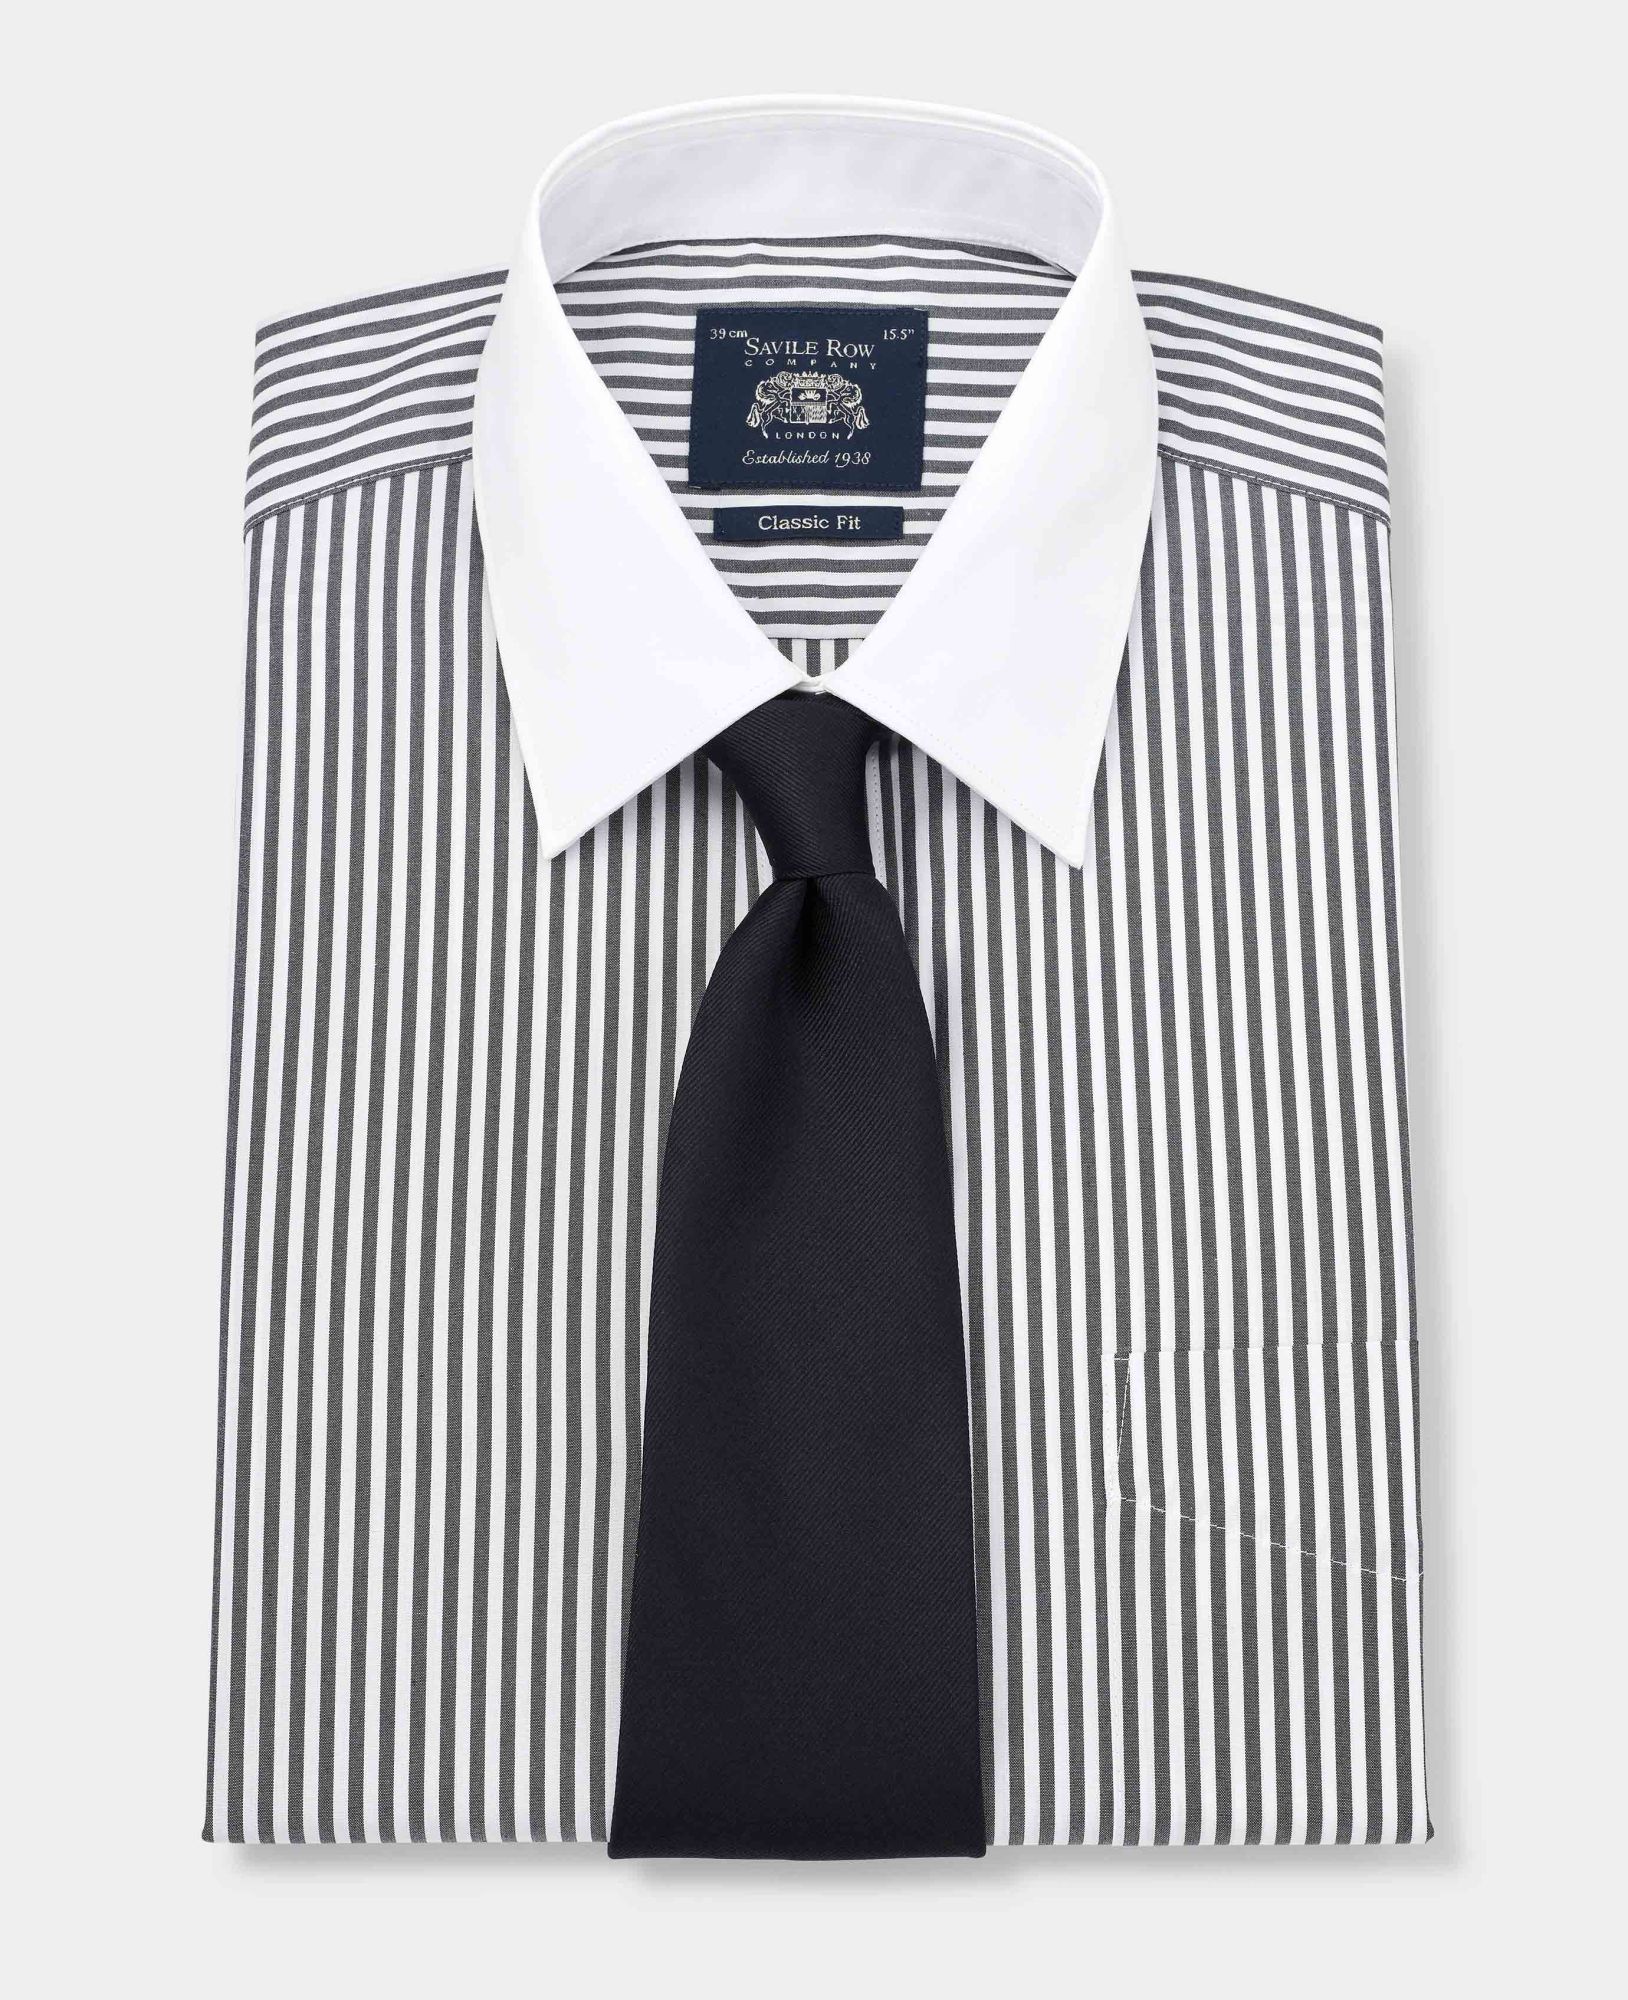 Black Stripe Classic Fit Contrast Collar Shirt With White Collar & Cuffs 19